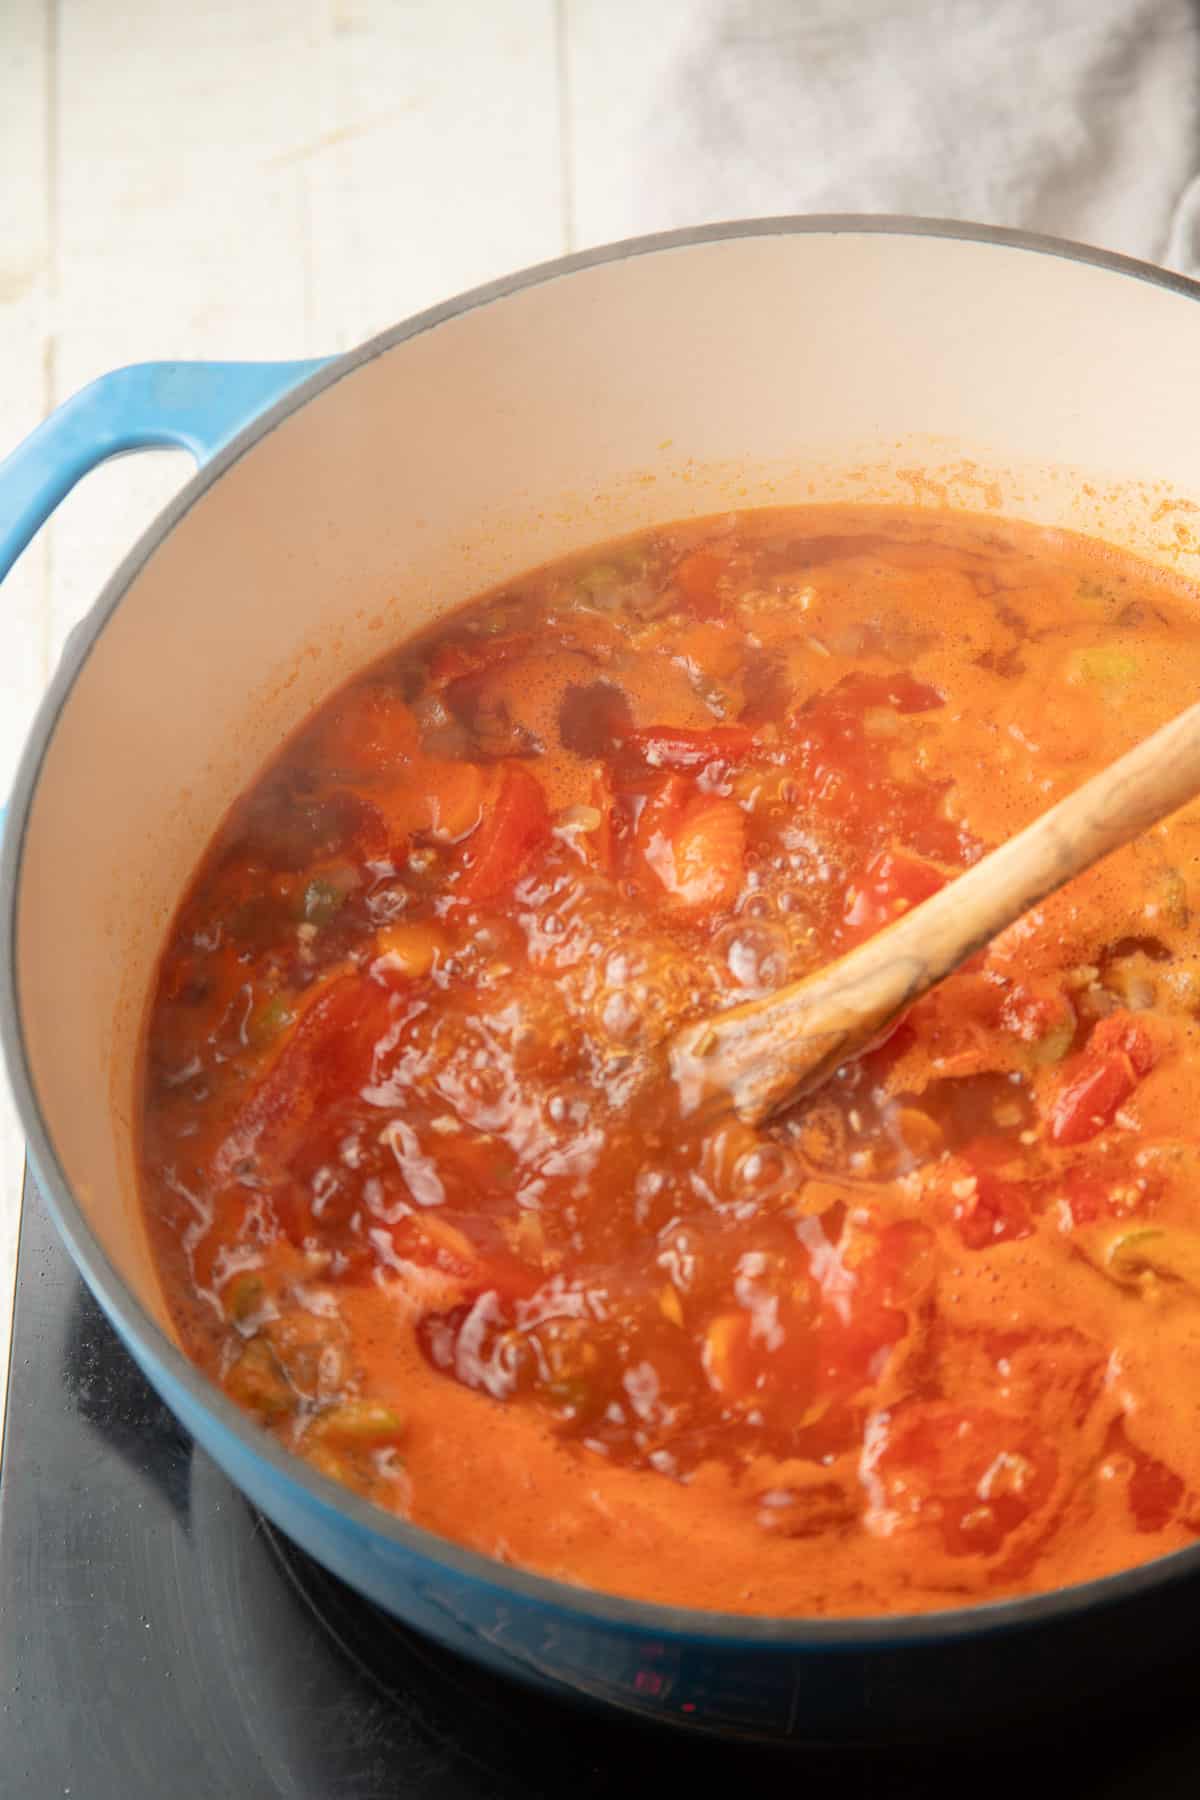 Tomatoes simmering in broth in a blue pot.